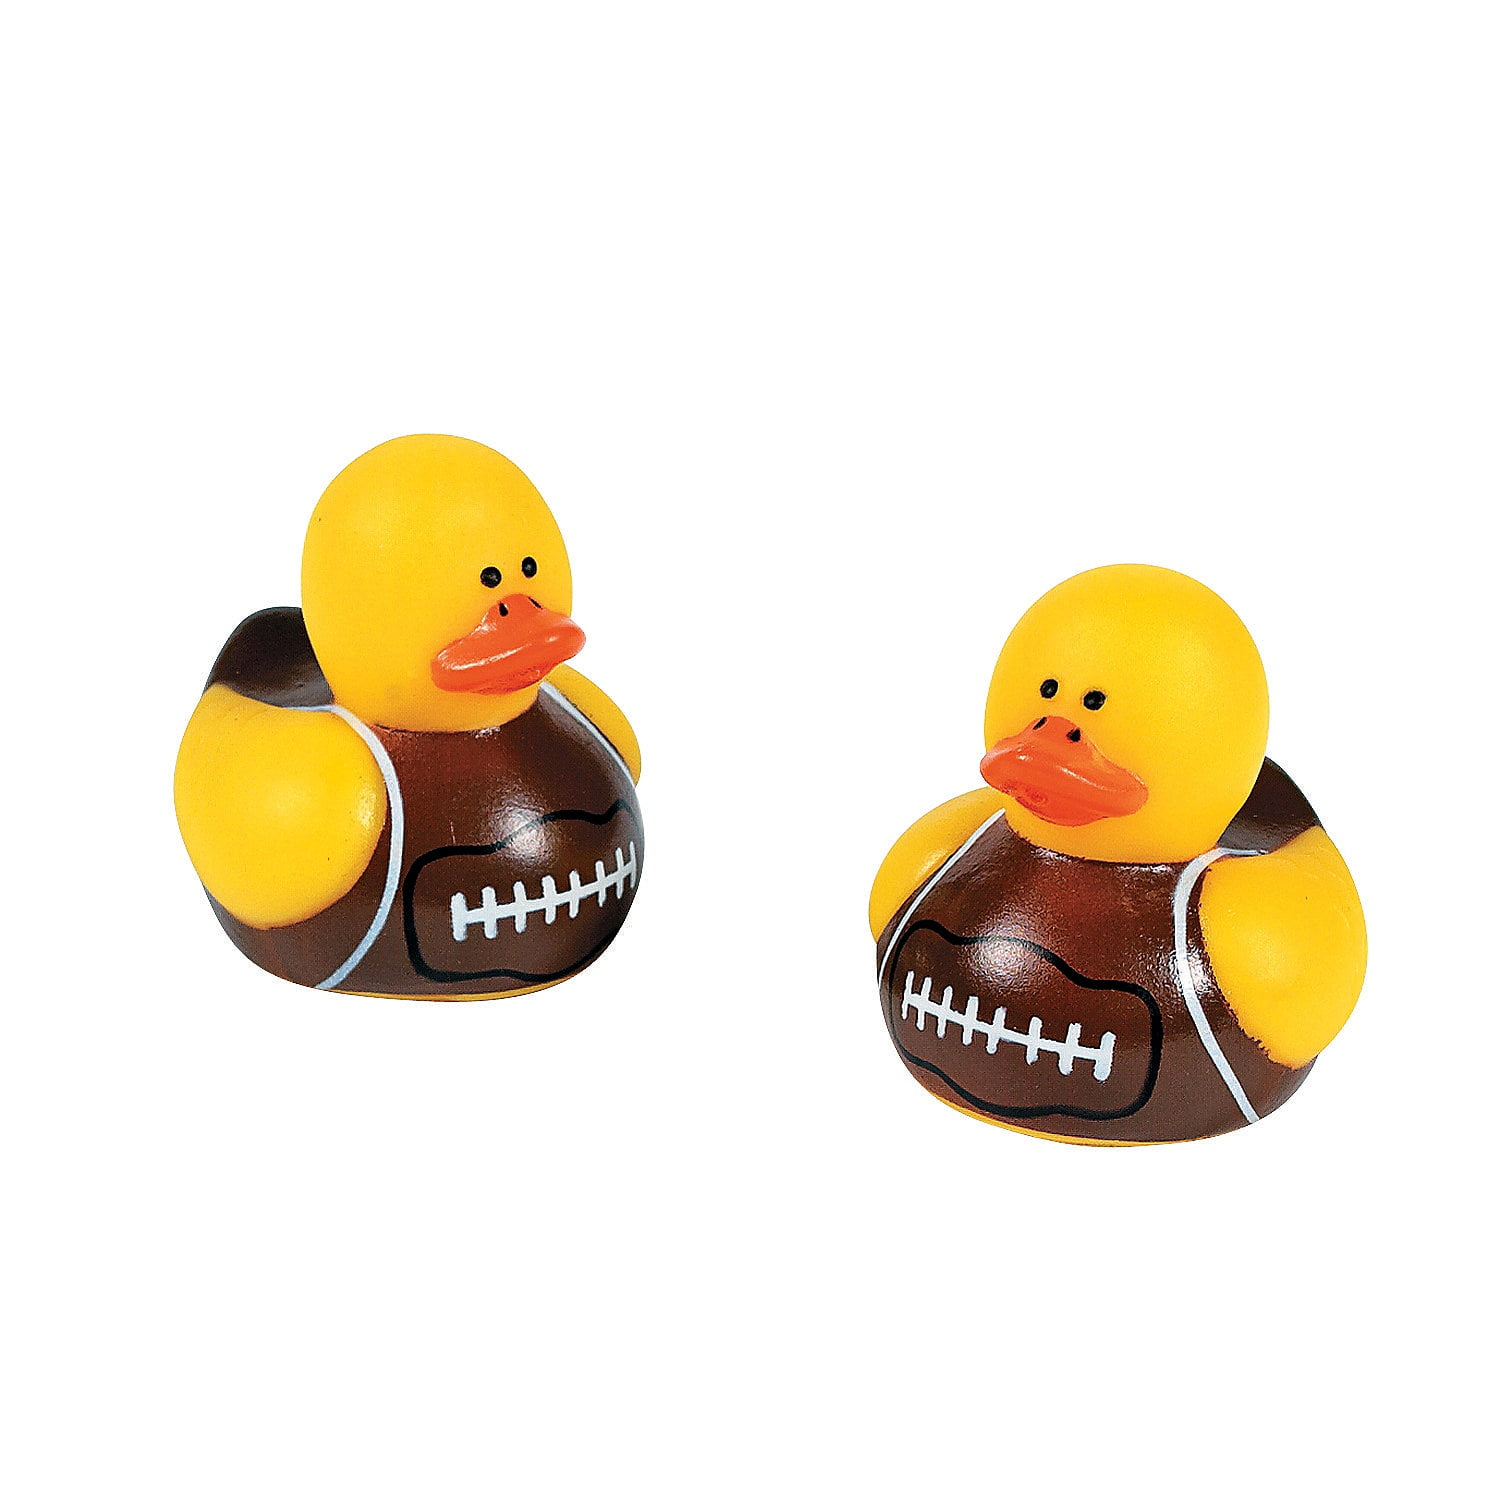 Novelty Gift AMERICAN FOOTBALL Rubber Duck Many Designs To Collect 